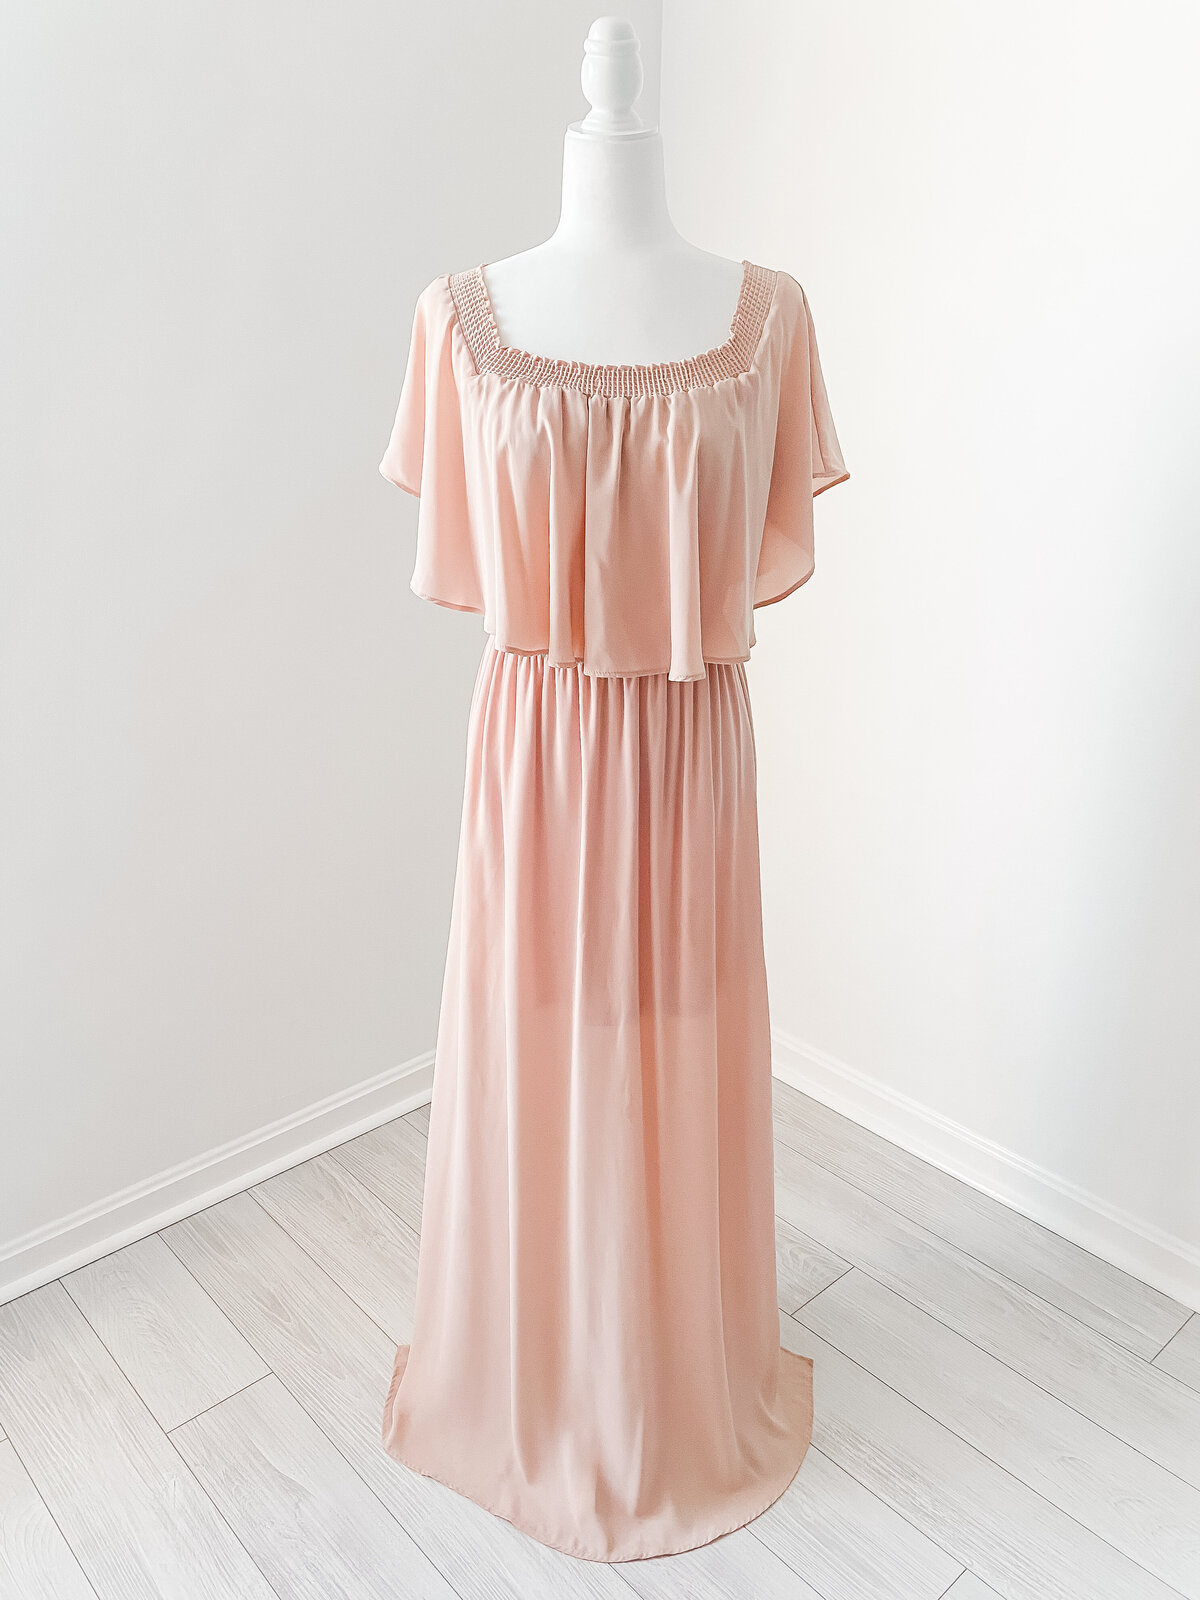 A pink off the shoulder maxi dress to wear for your Baby Photography photos in Northern Virginia